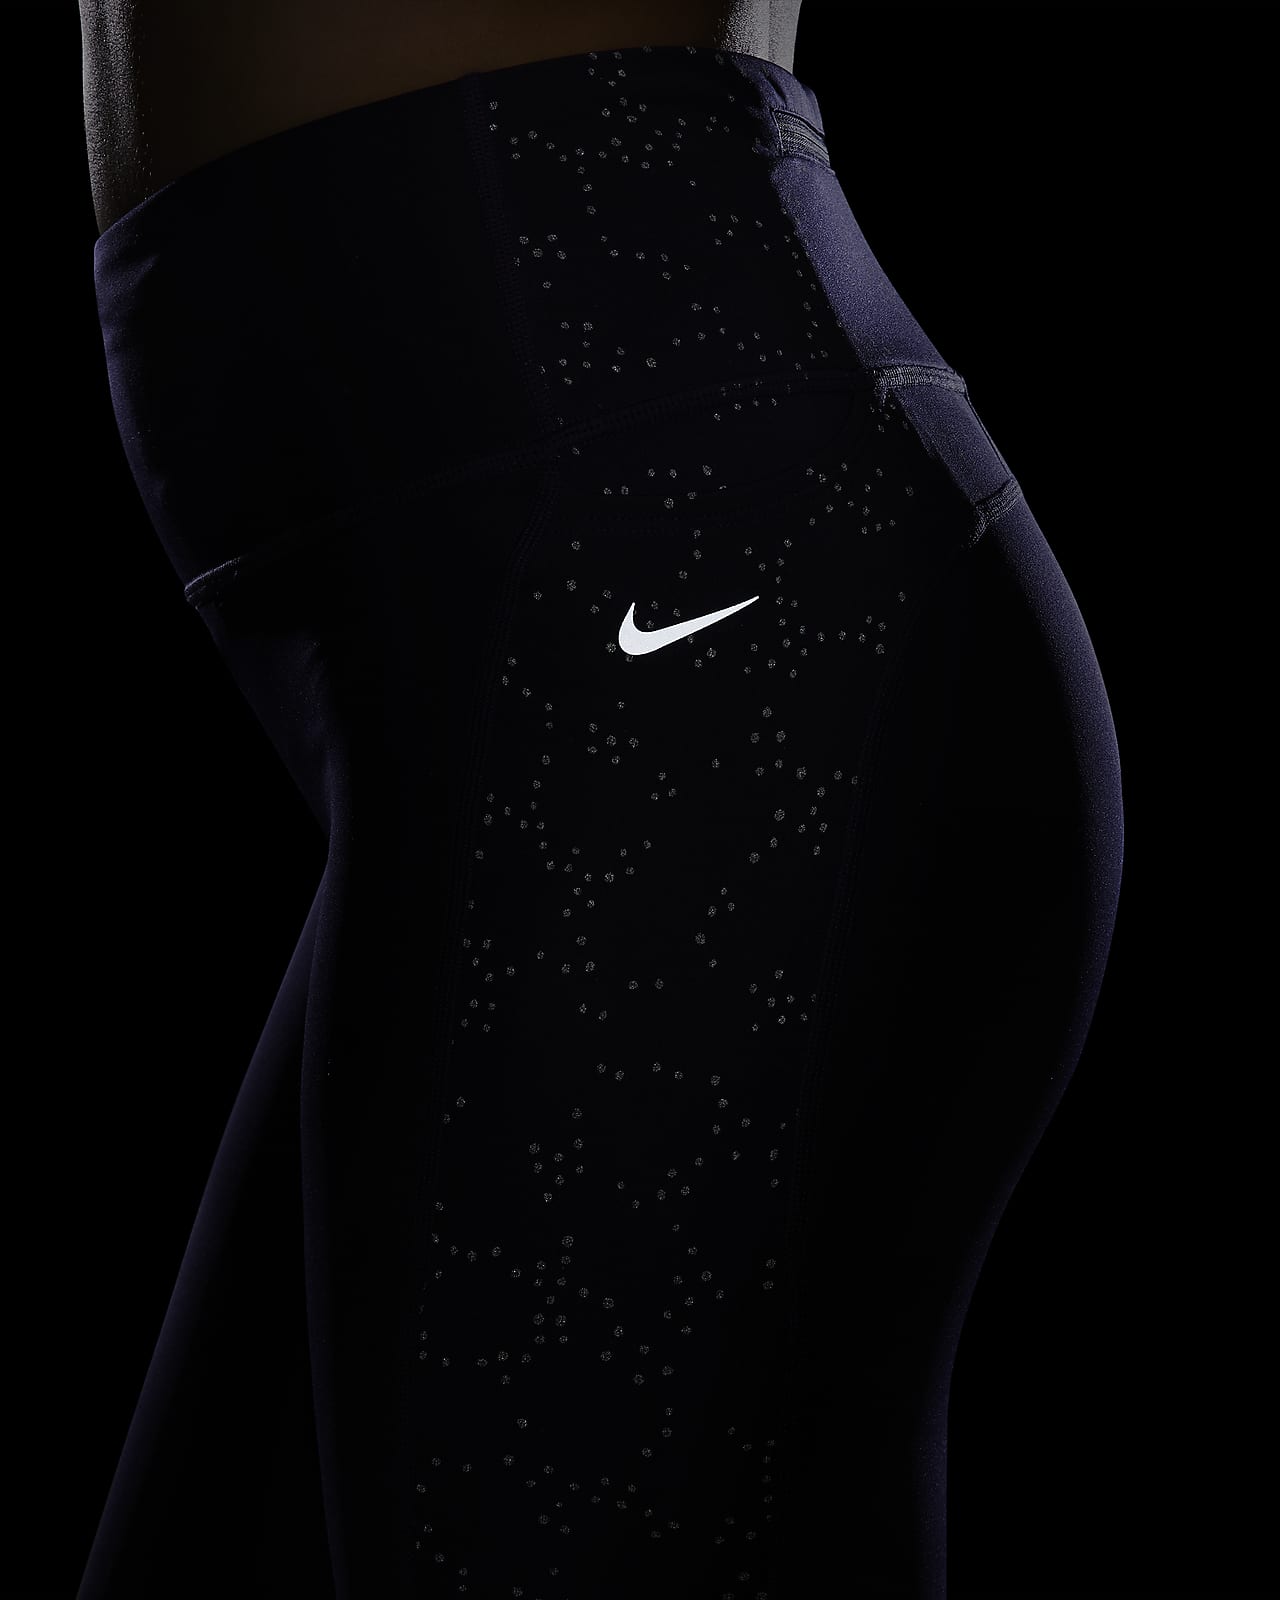 Nike Fast Women's Mid-Rise 7/8 Printed Leggings with Pockets